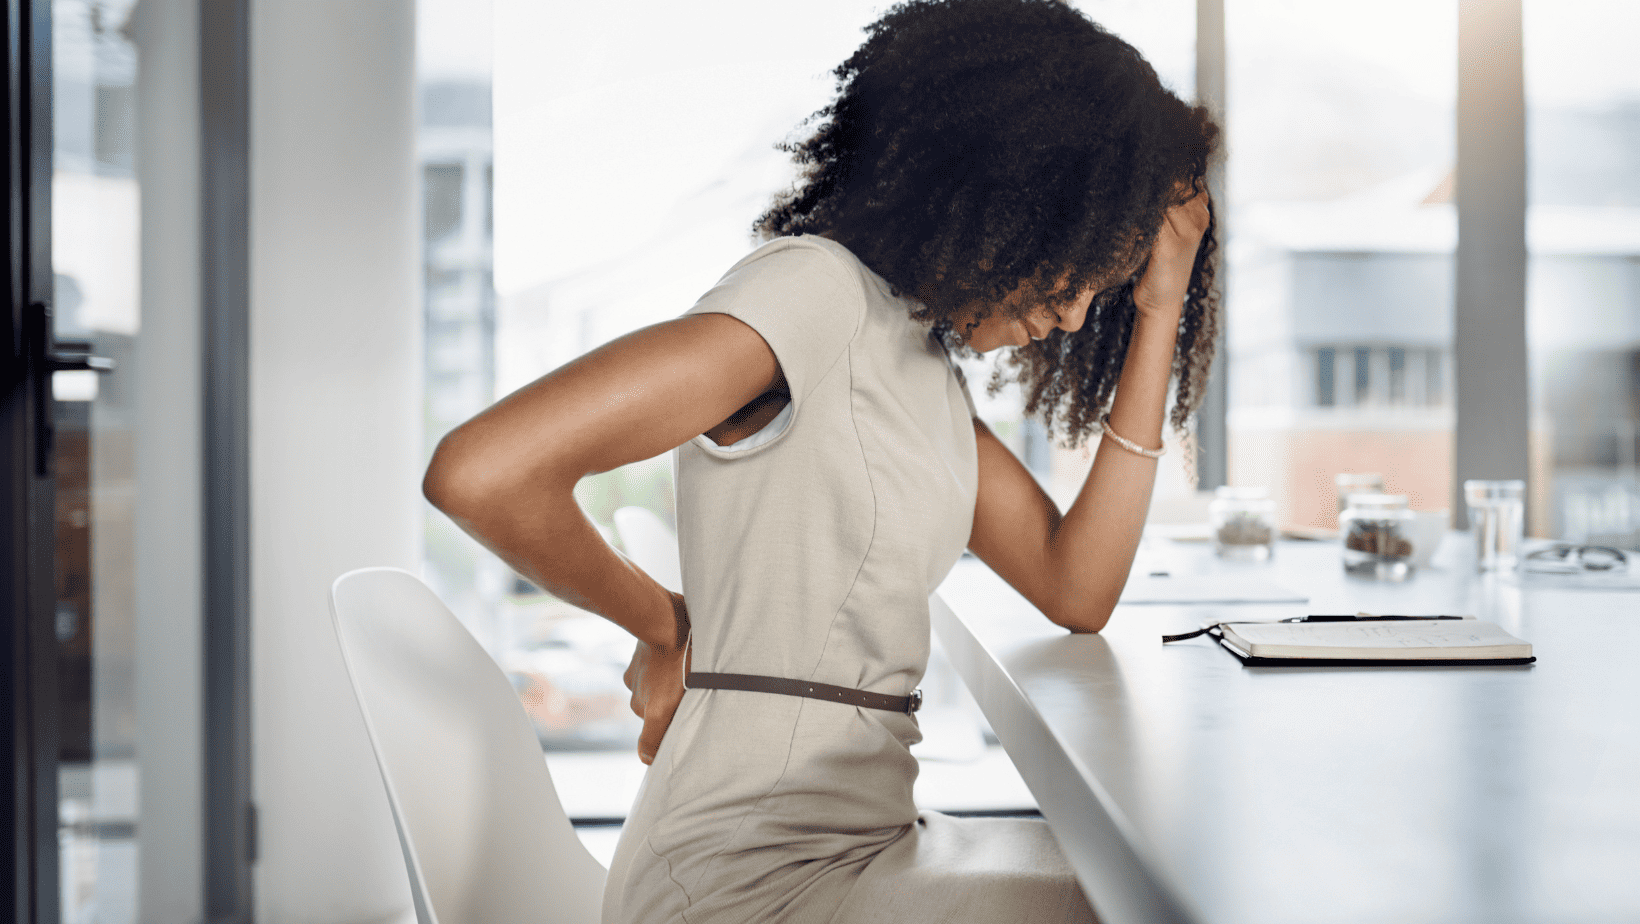 5 Things That Will Make Your Back Pain Worse